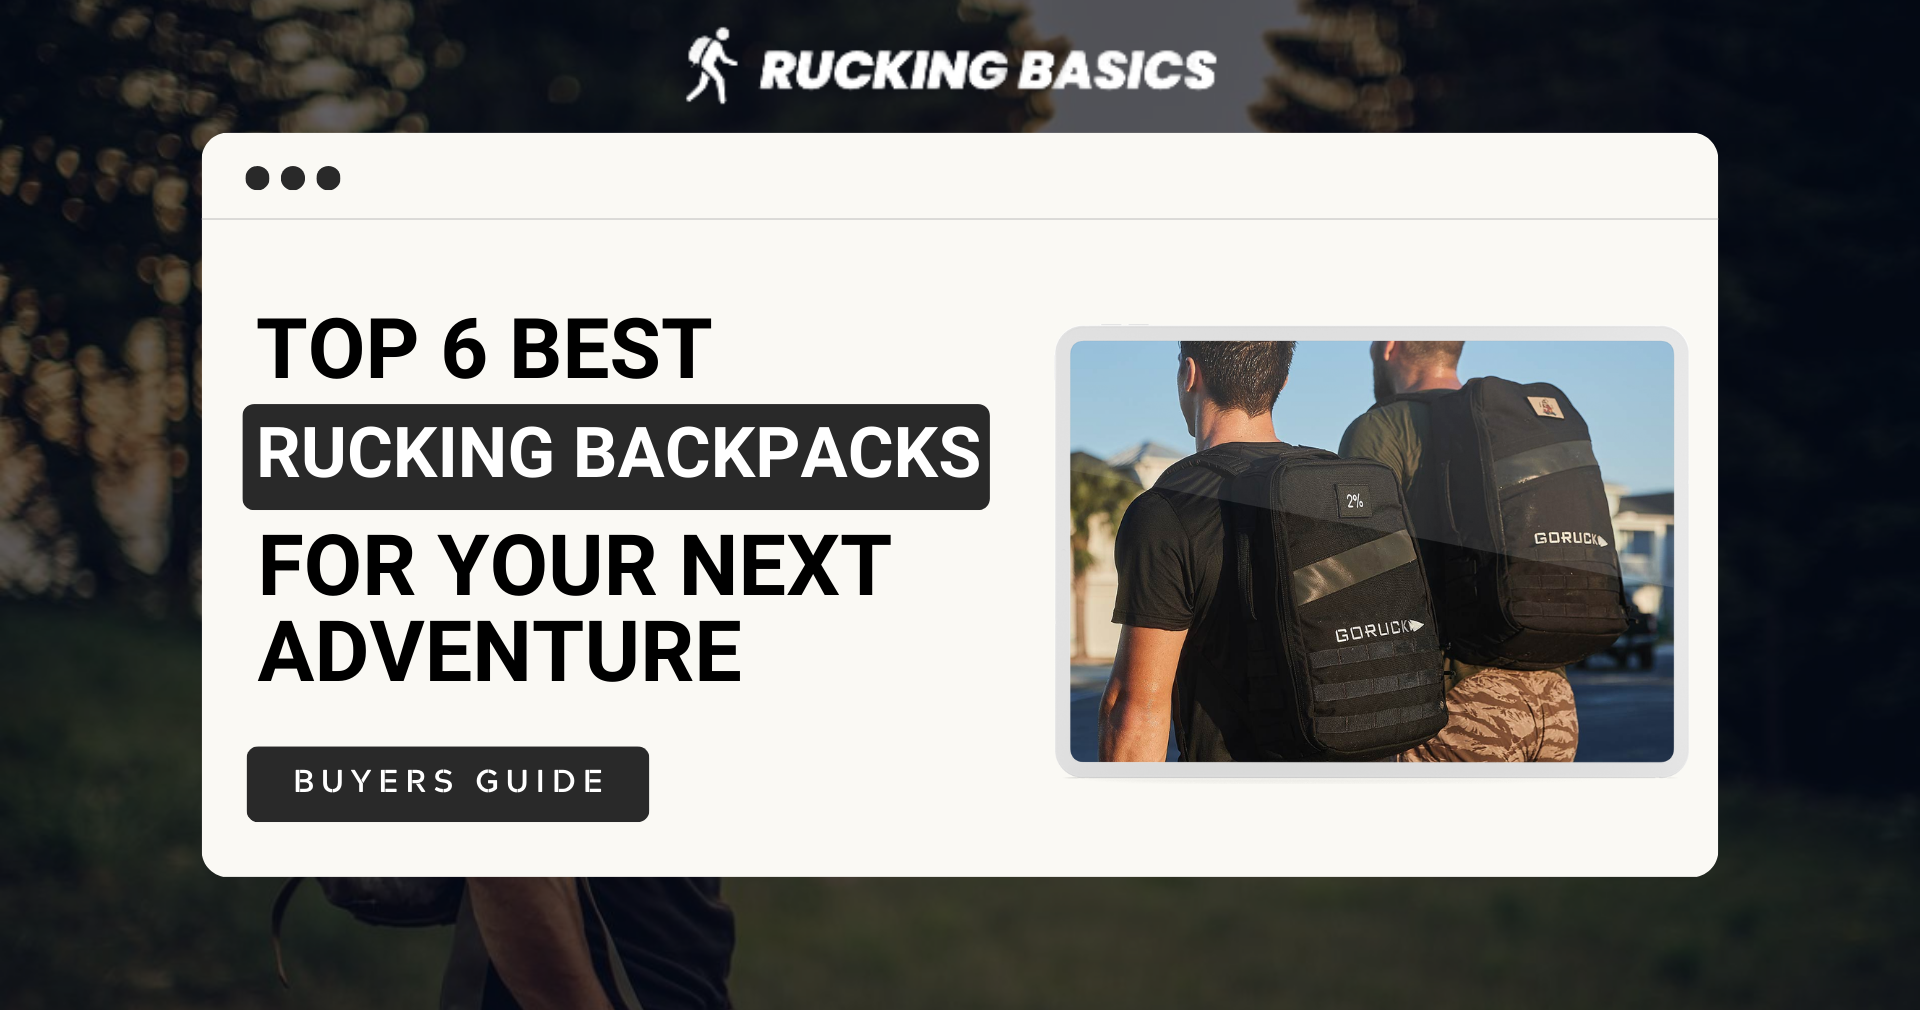 Top 6 Best Rucking Backpacks for Your Next Adventure